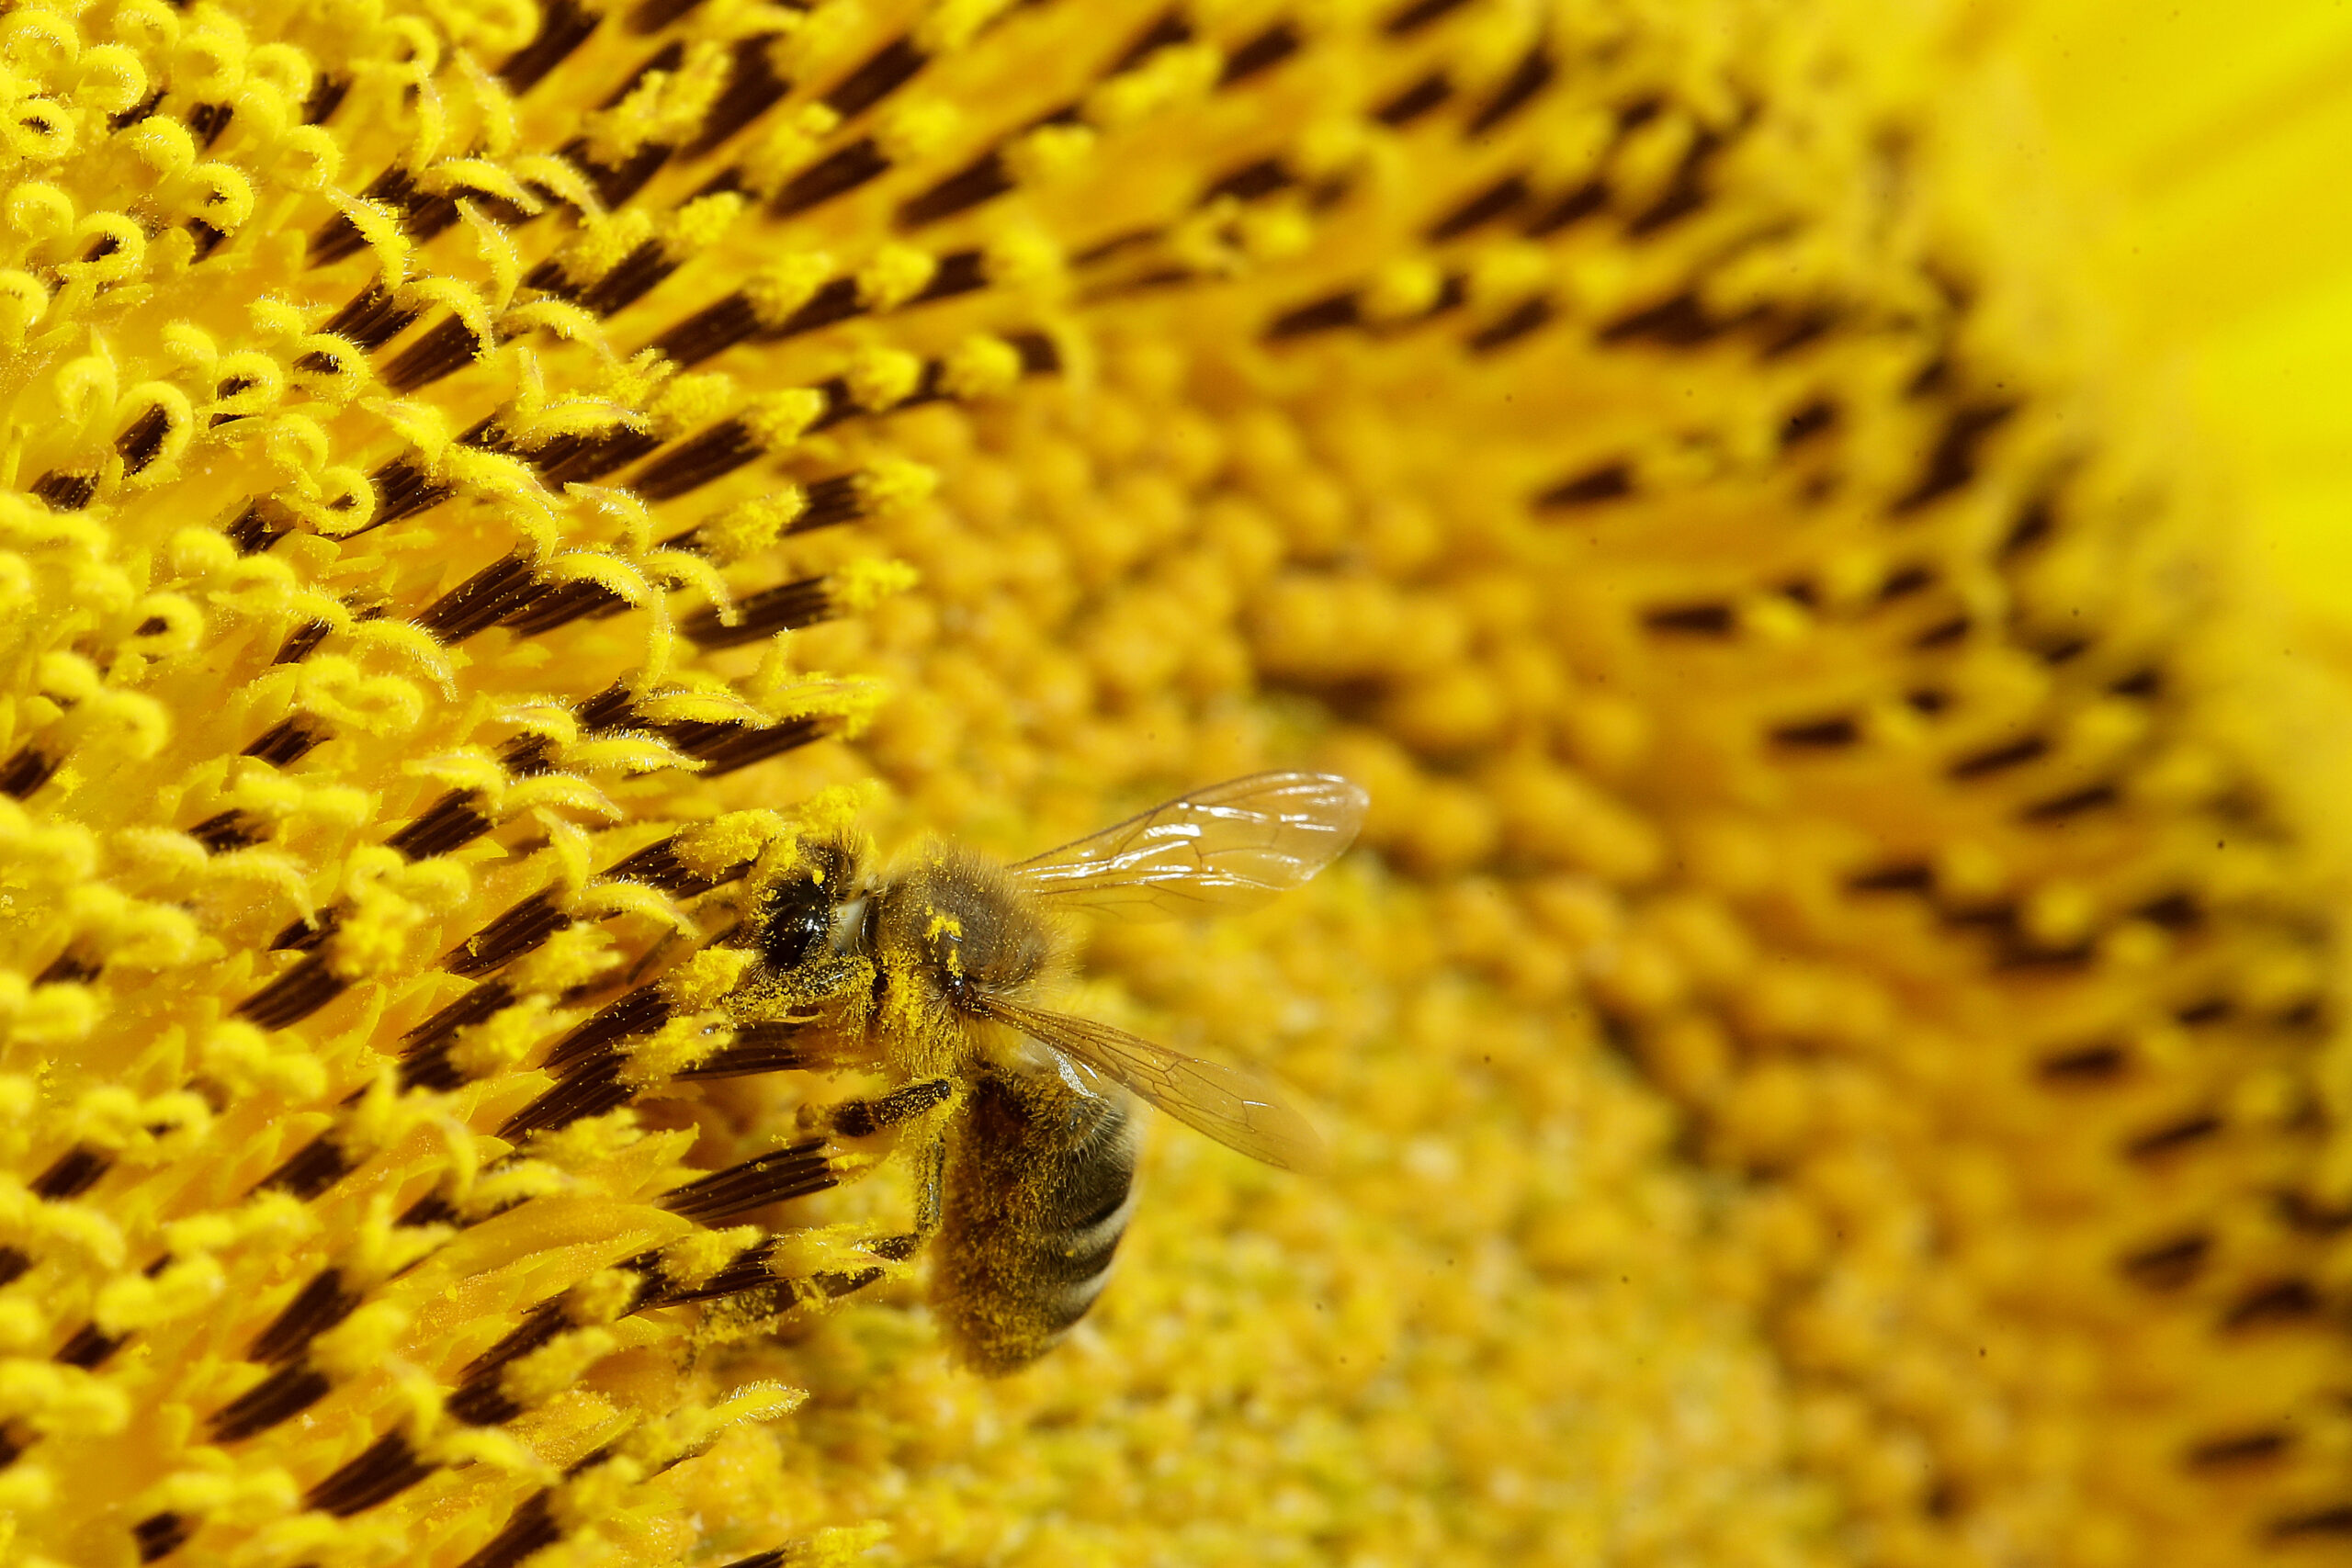 Closeup of a bee on a yellow flower